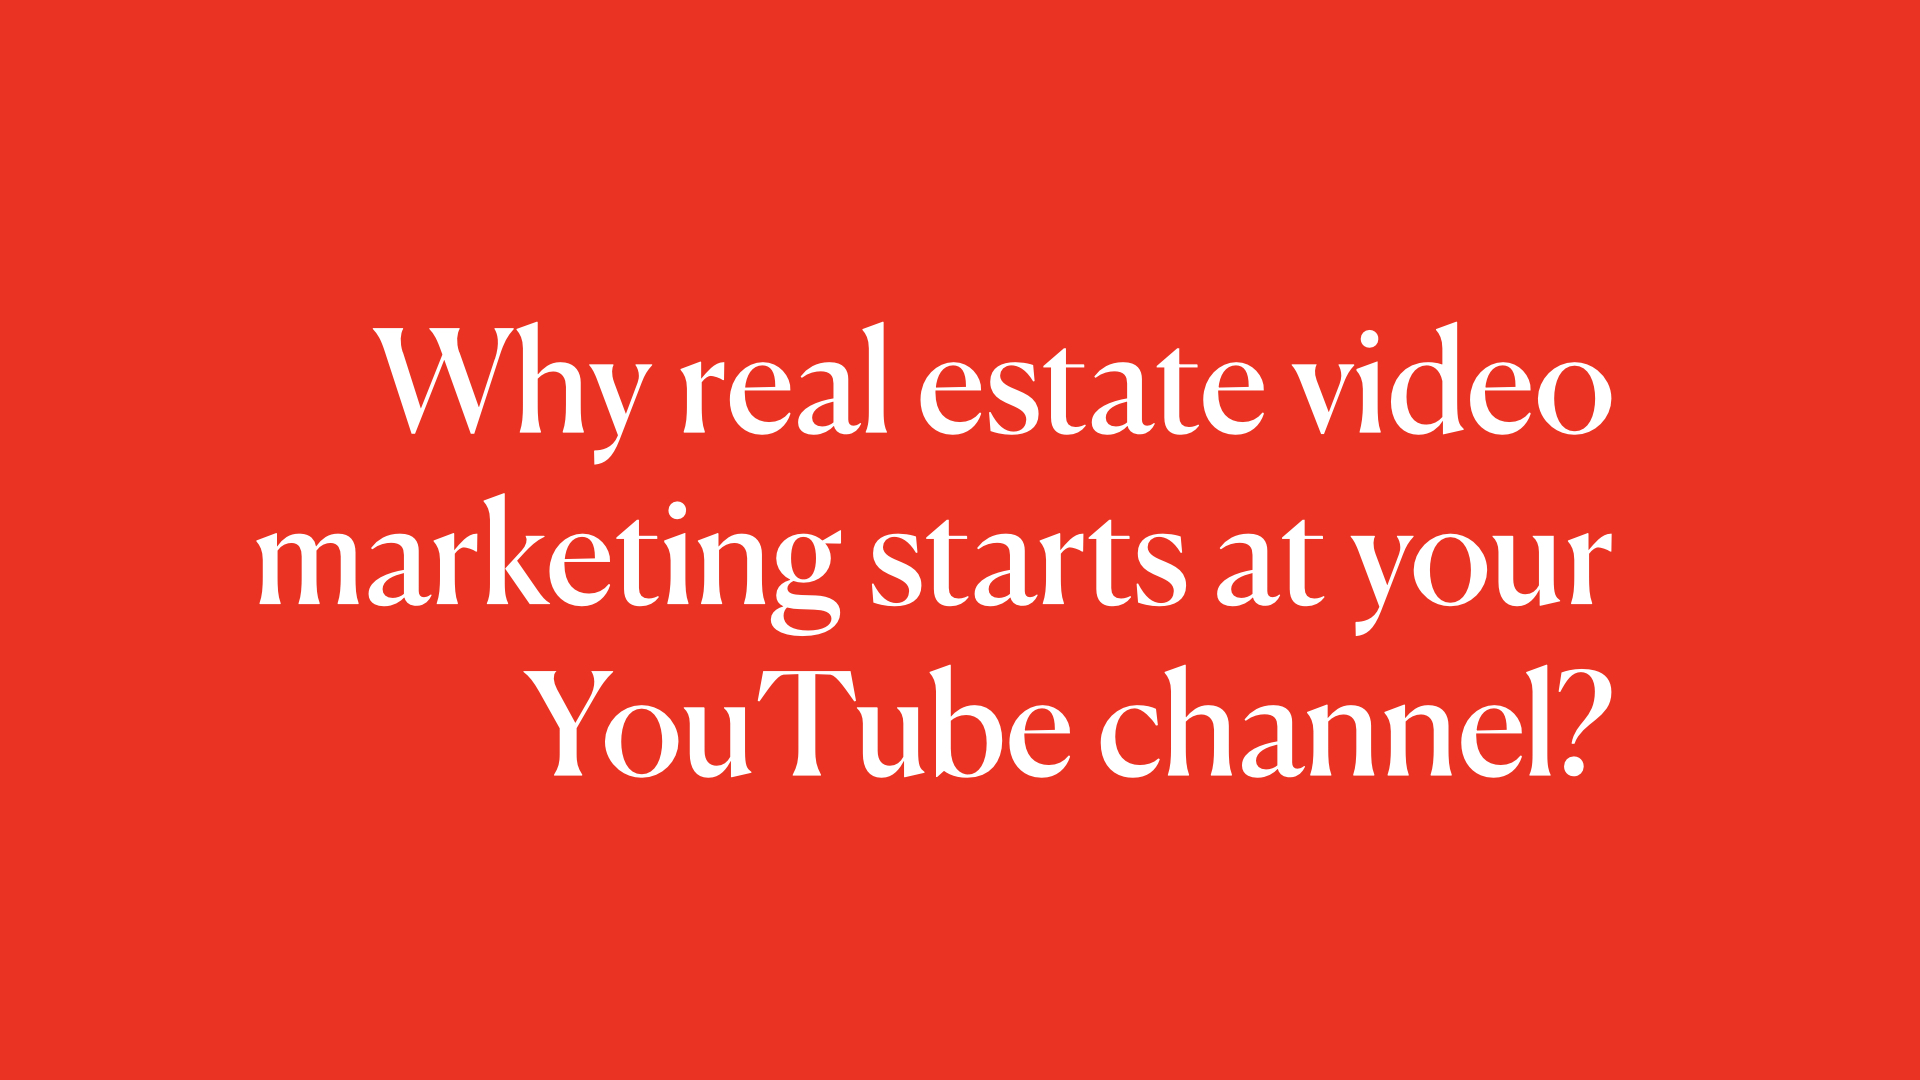 Why real estate video marketing starts at your YouTube channel